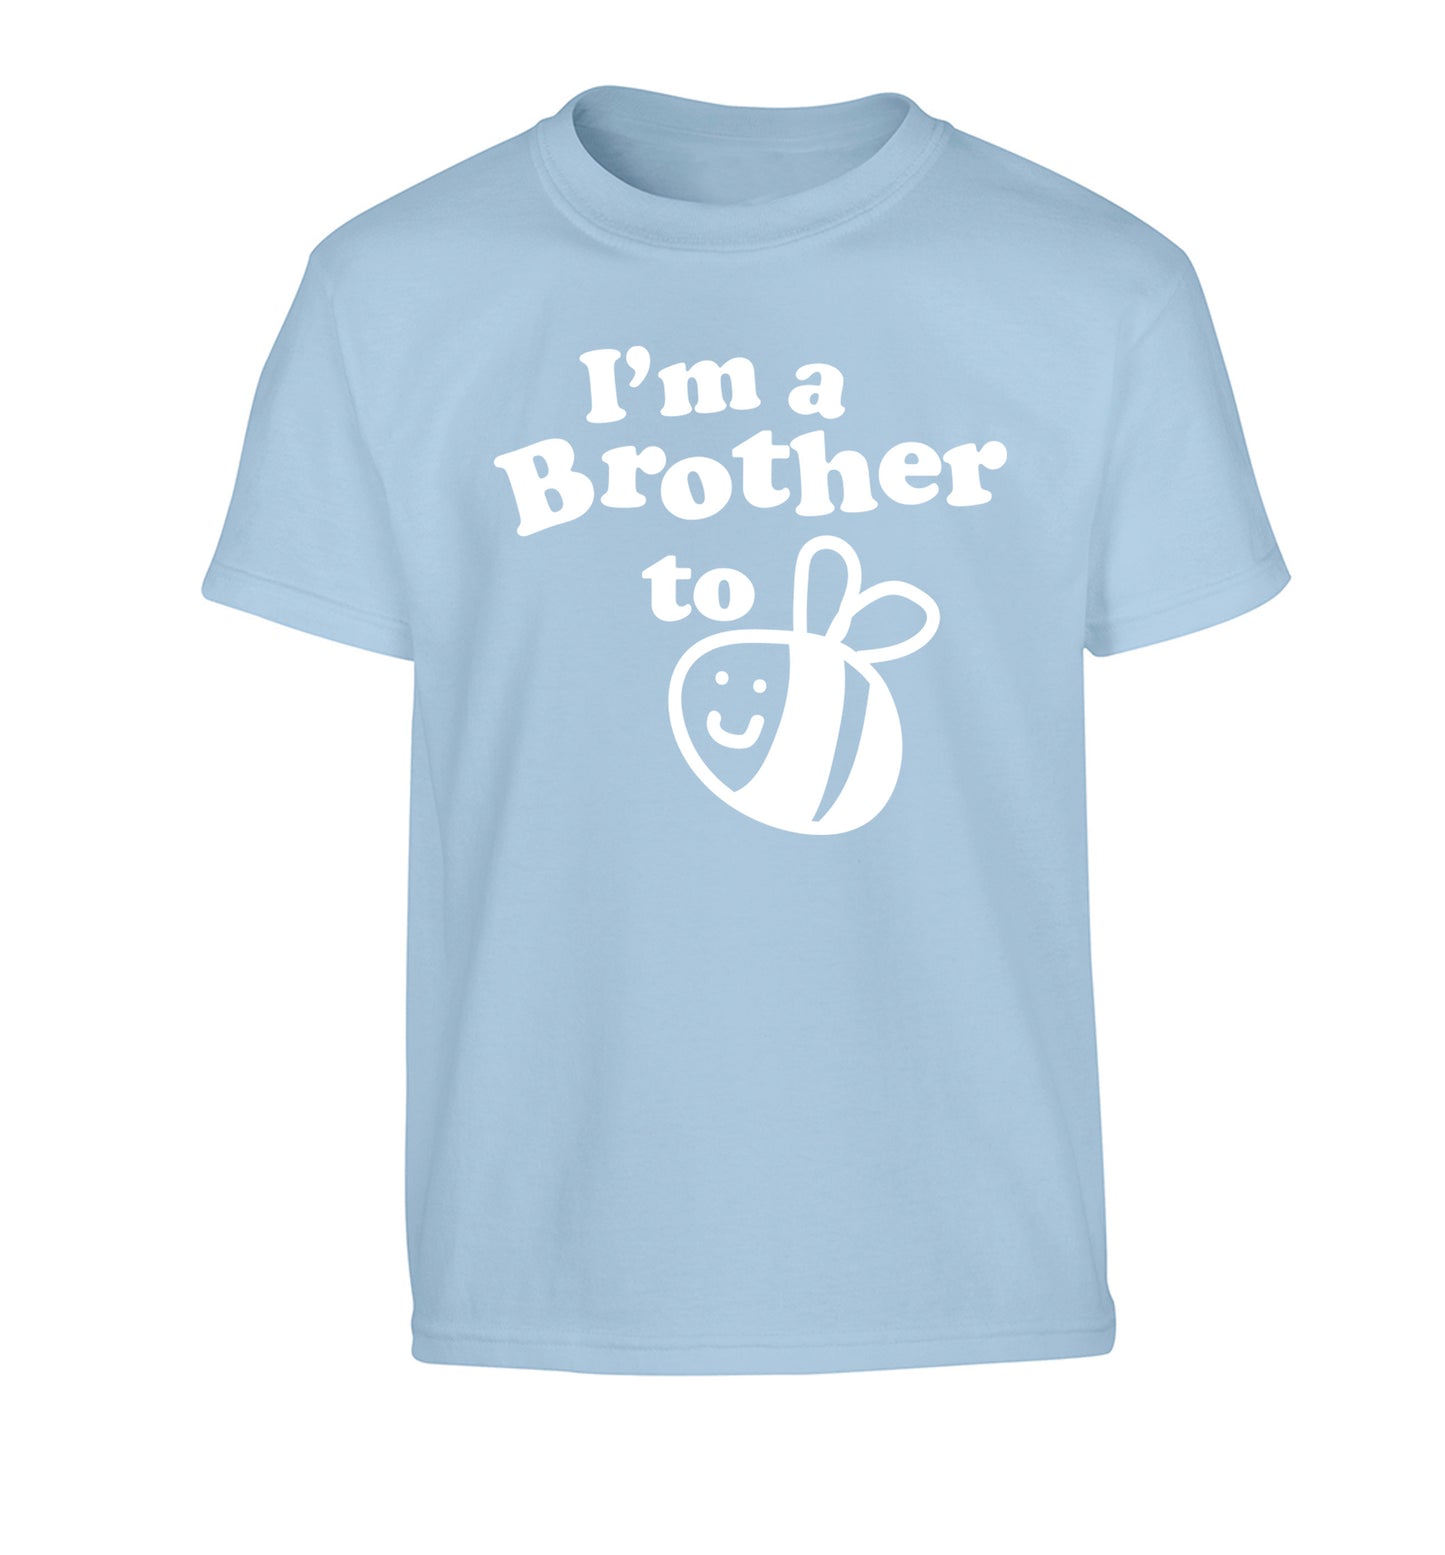 I'm a brother to be Children's light blue Tshirt 12-14 Years